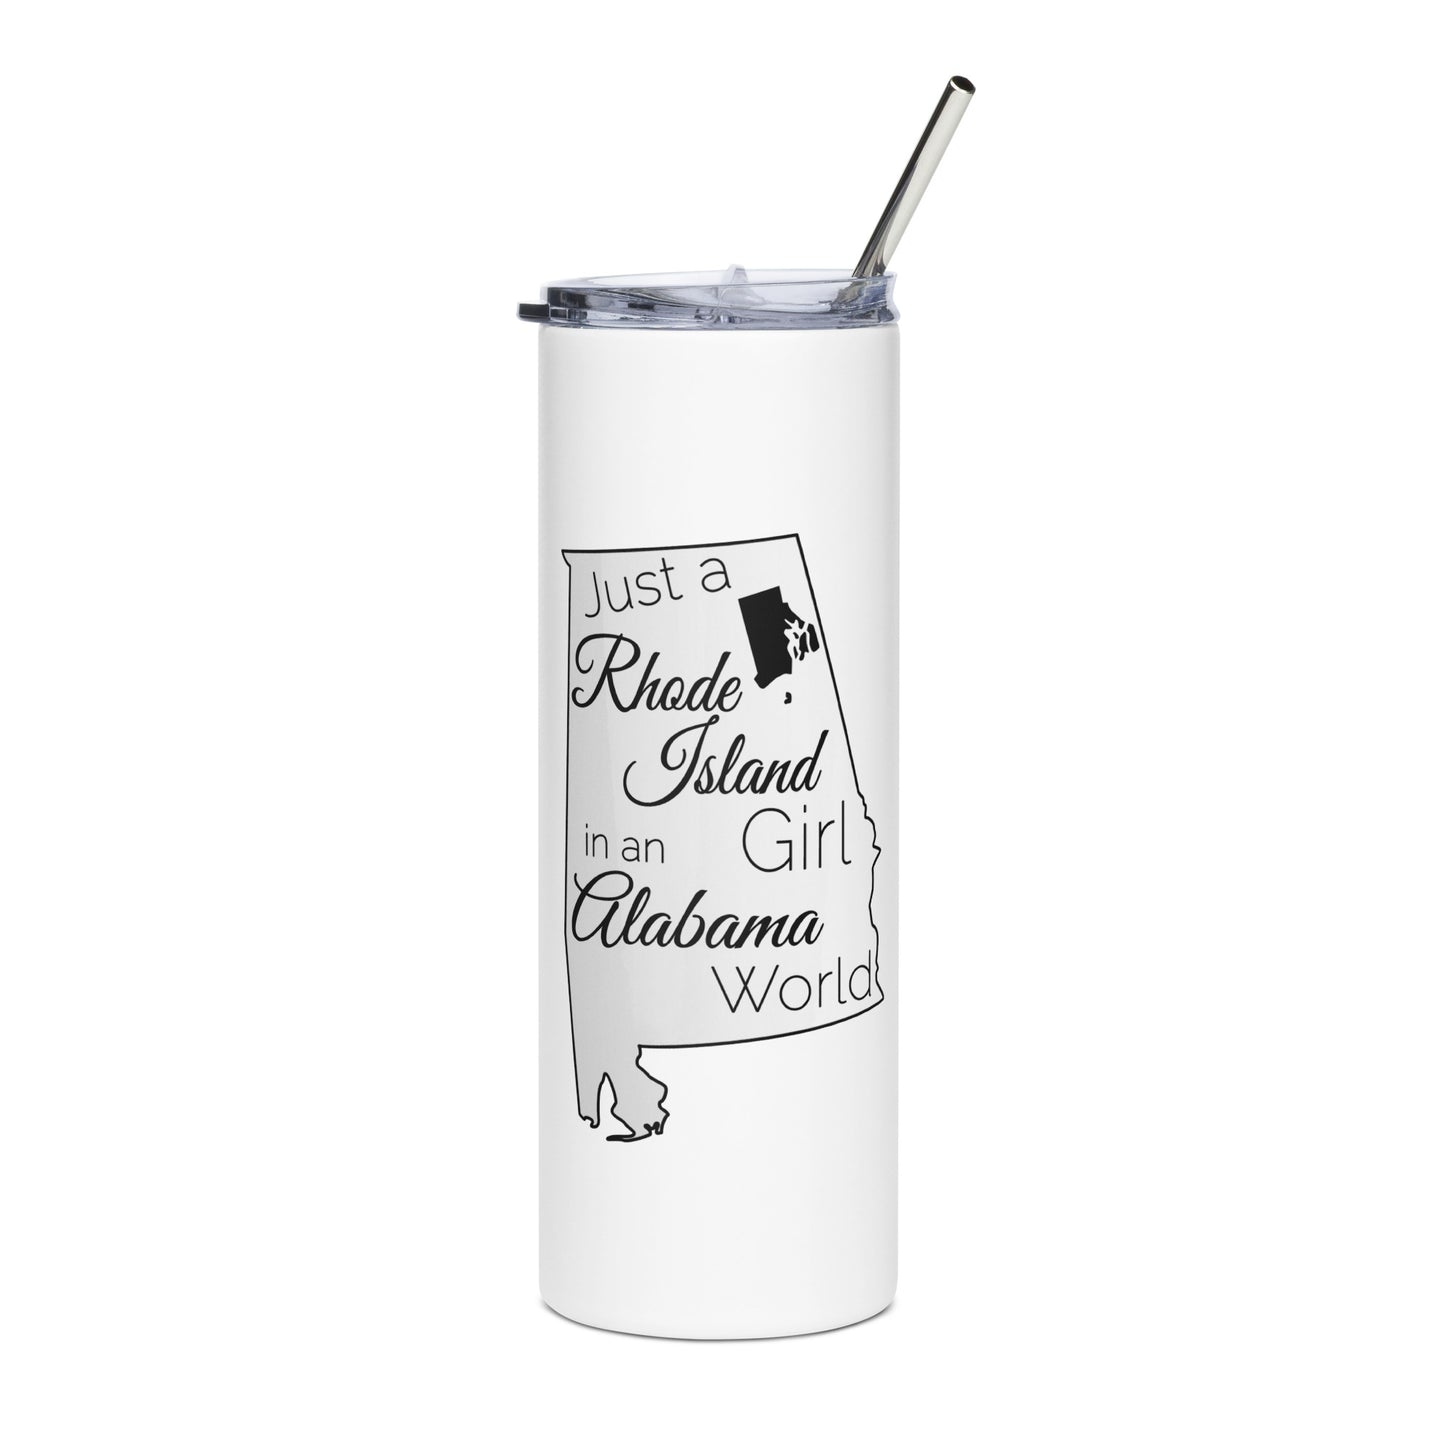 Just a Rhode Island Girl in an Alabama World Stainless steel tumbler